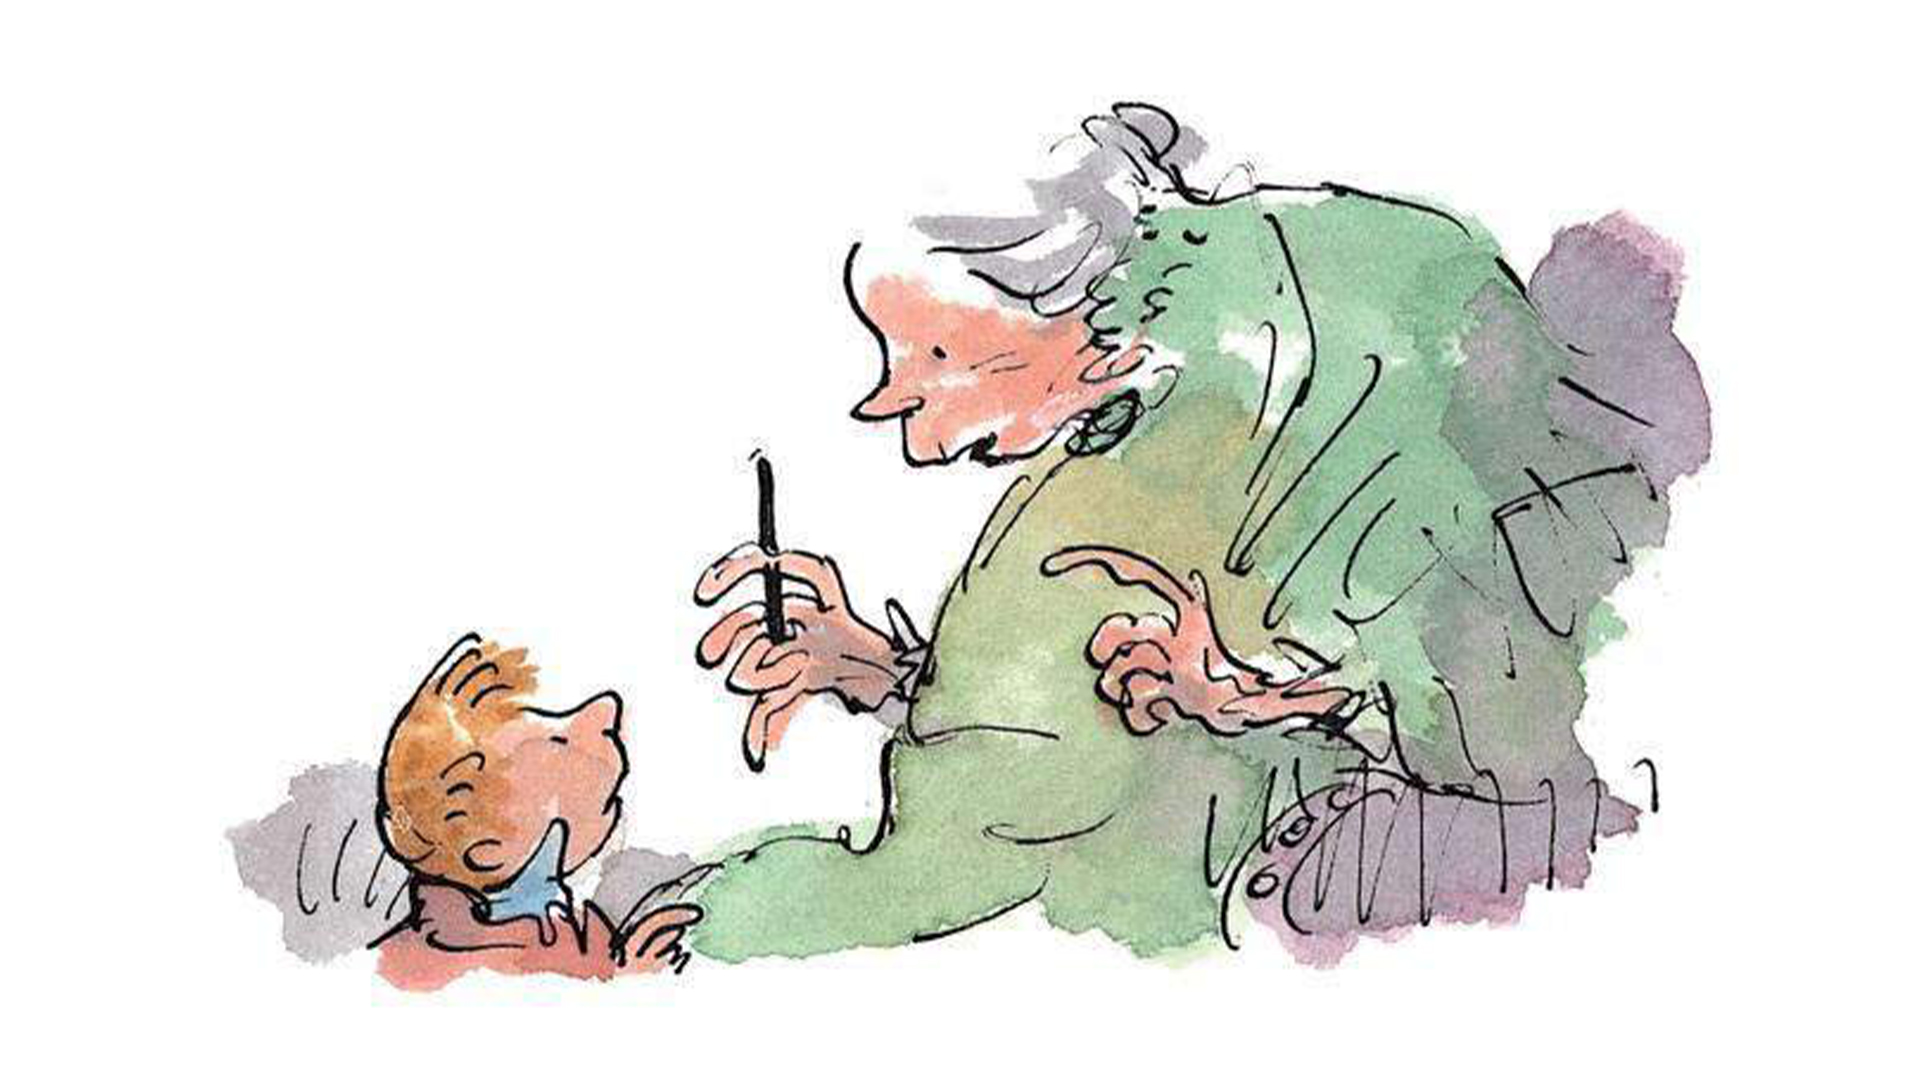 The Witches illustration by Quentin Blake